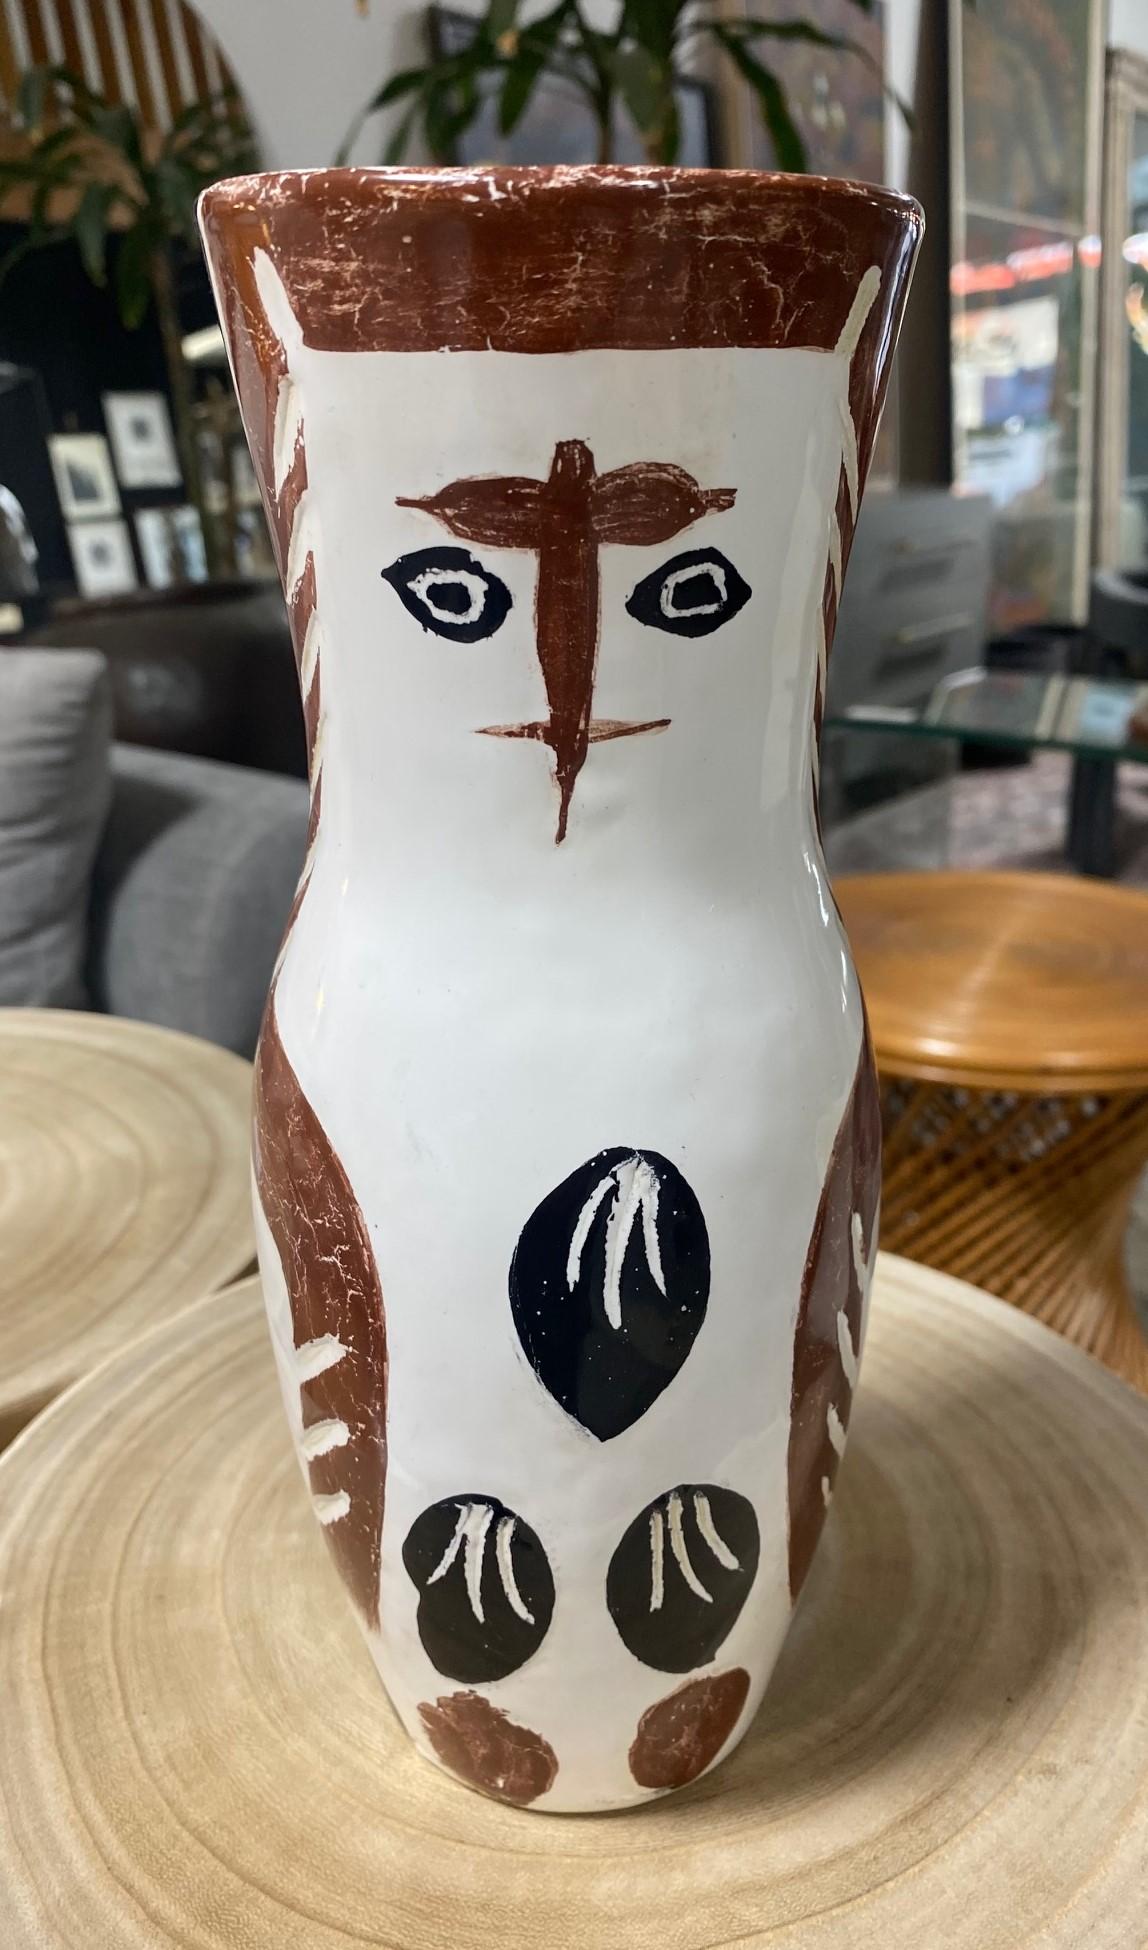 Glazed Pablo Picasso Signed Limited Madoura Pottery Chouetton Owl Vase A.R. 135, 1952 For Sale